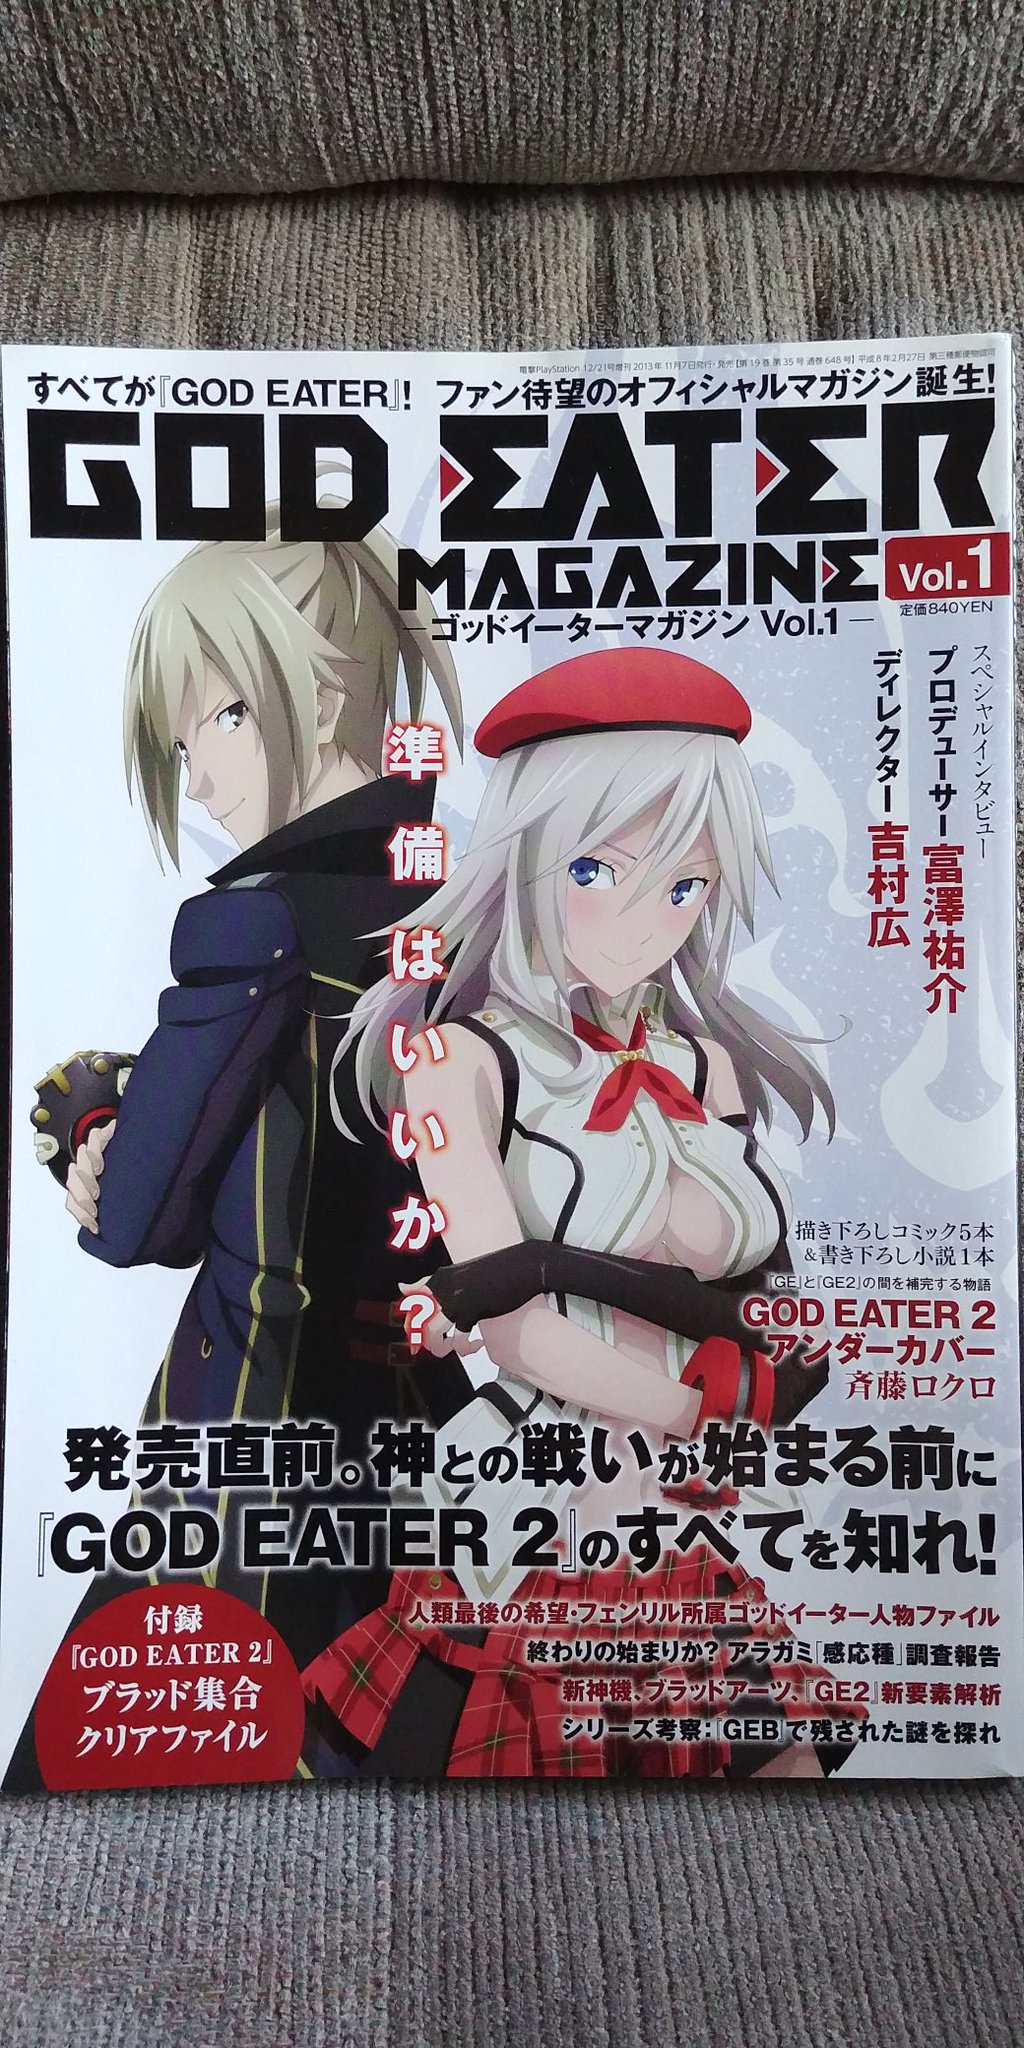 Eon Breaker Thanks To An Amazing Friend Of Mine I Now Have 3 Of The Exclusive God Eater Magazines Straight From Japan I Can T Read Japanese At All But There S